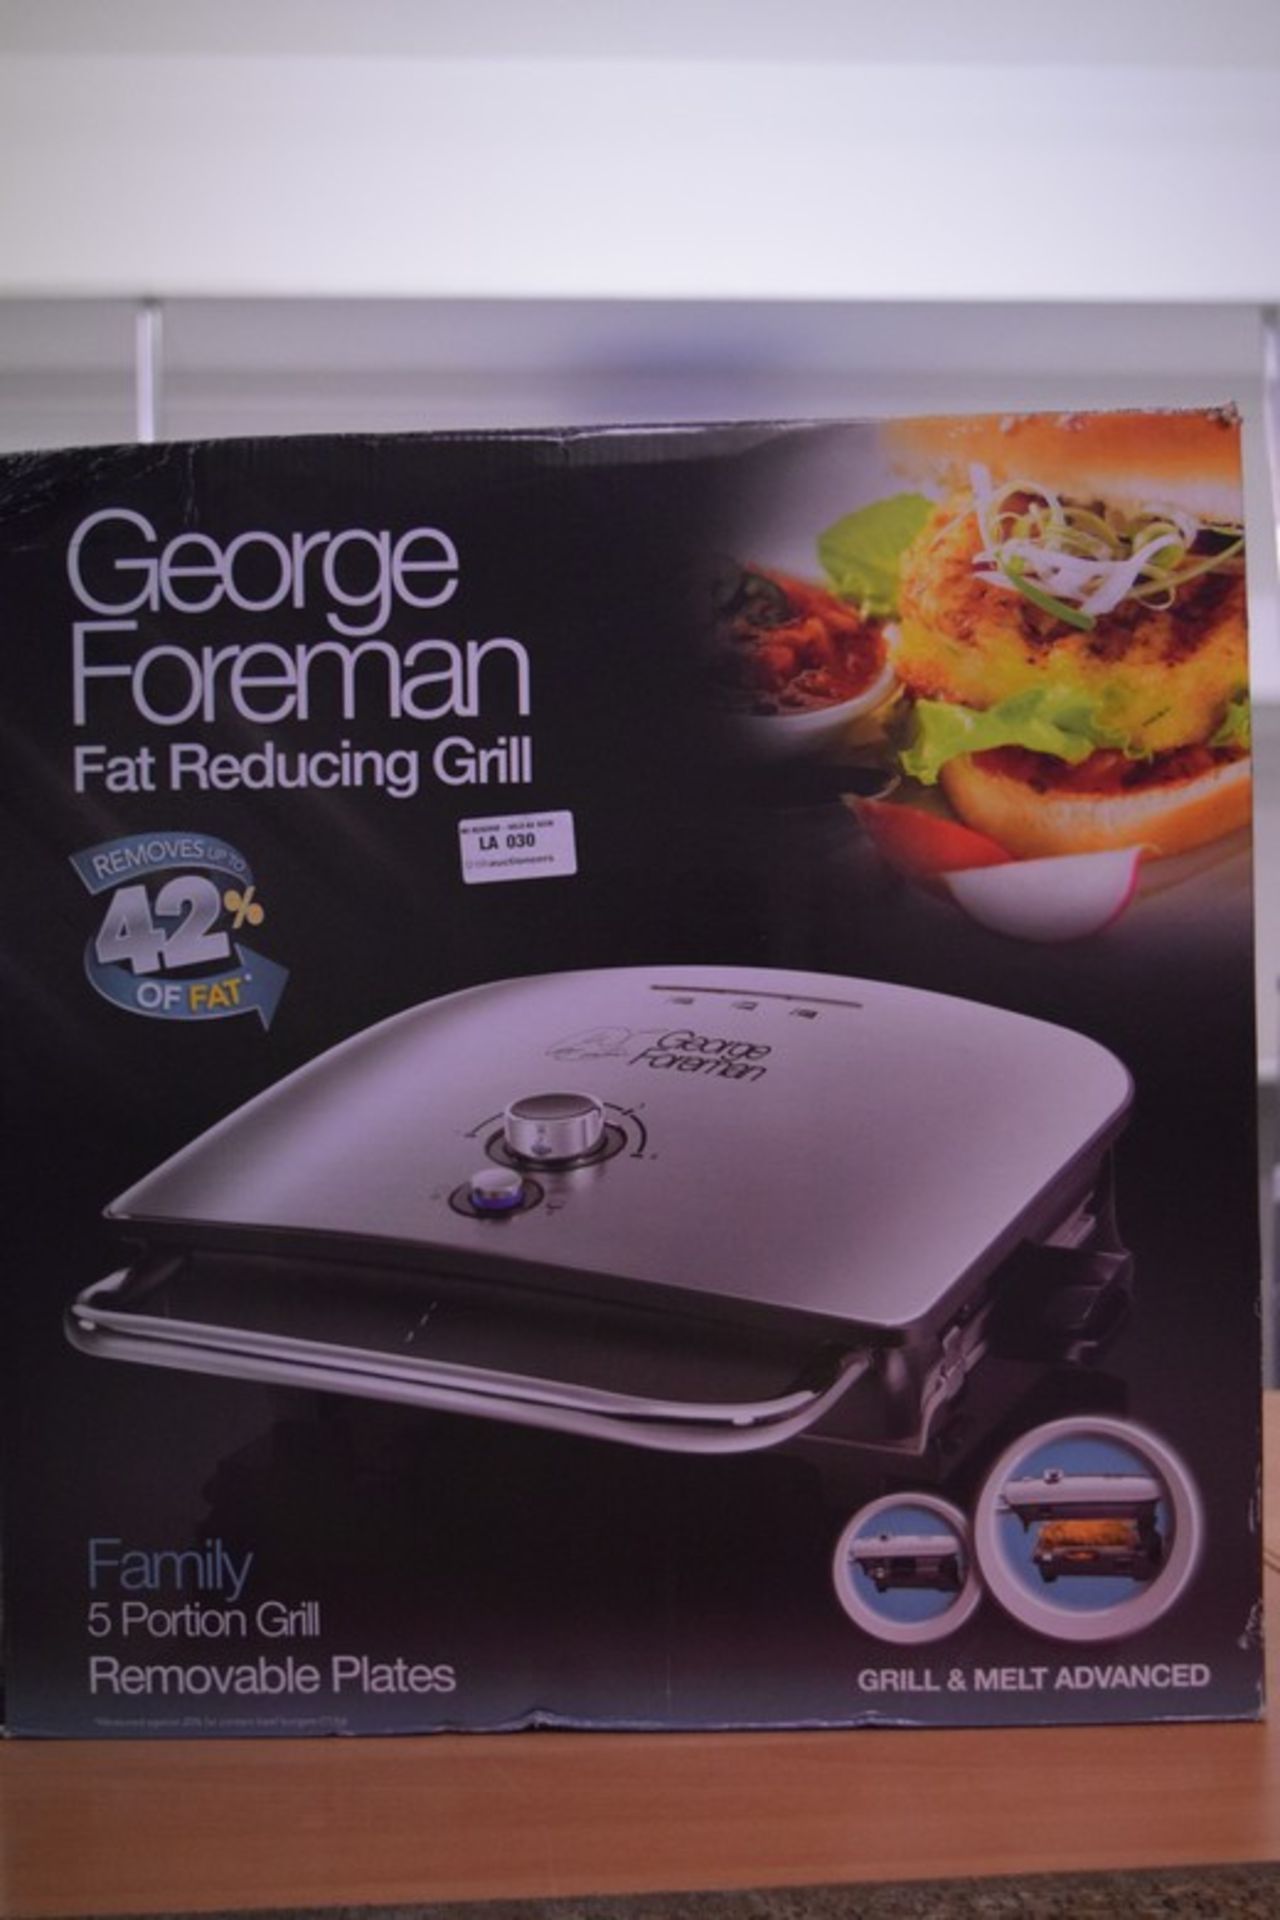 1 x BOXED GEORGE FORMAN FAT REDUCING GRILL TO FIT 5 PORTIONS RRP £65 16/11/16 *PLEASE NOTE THAT